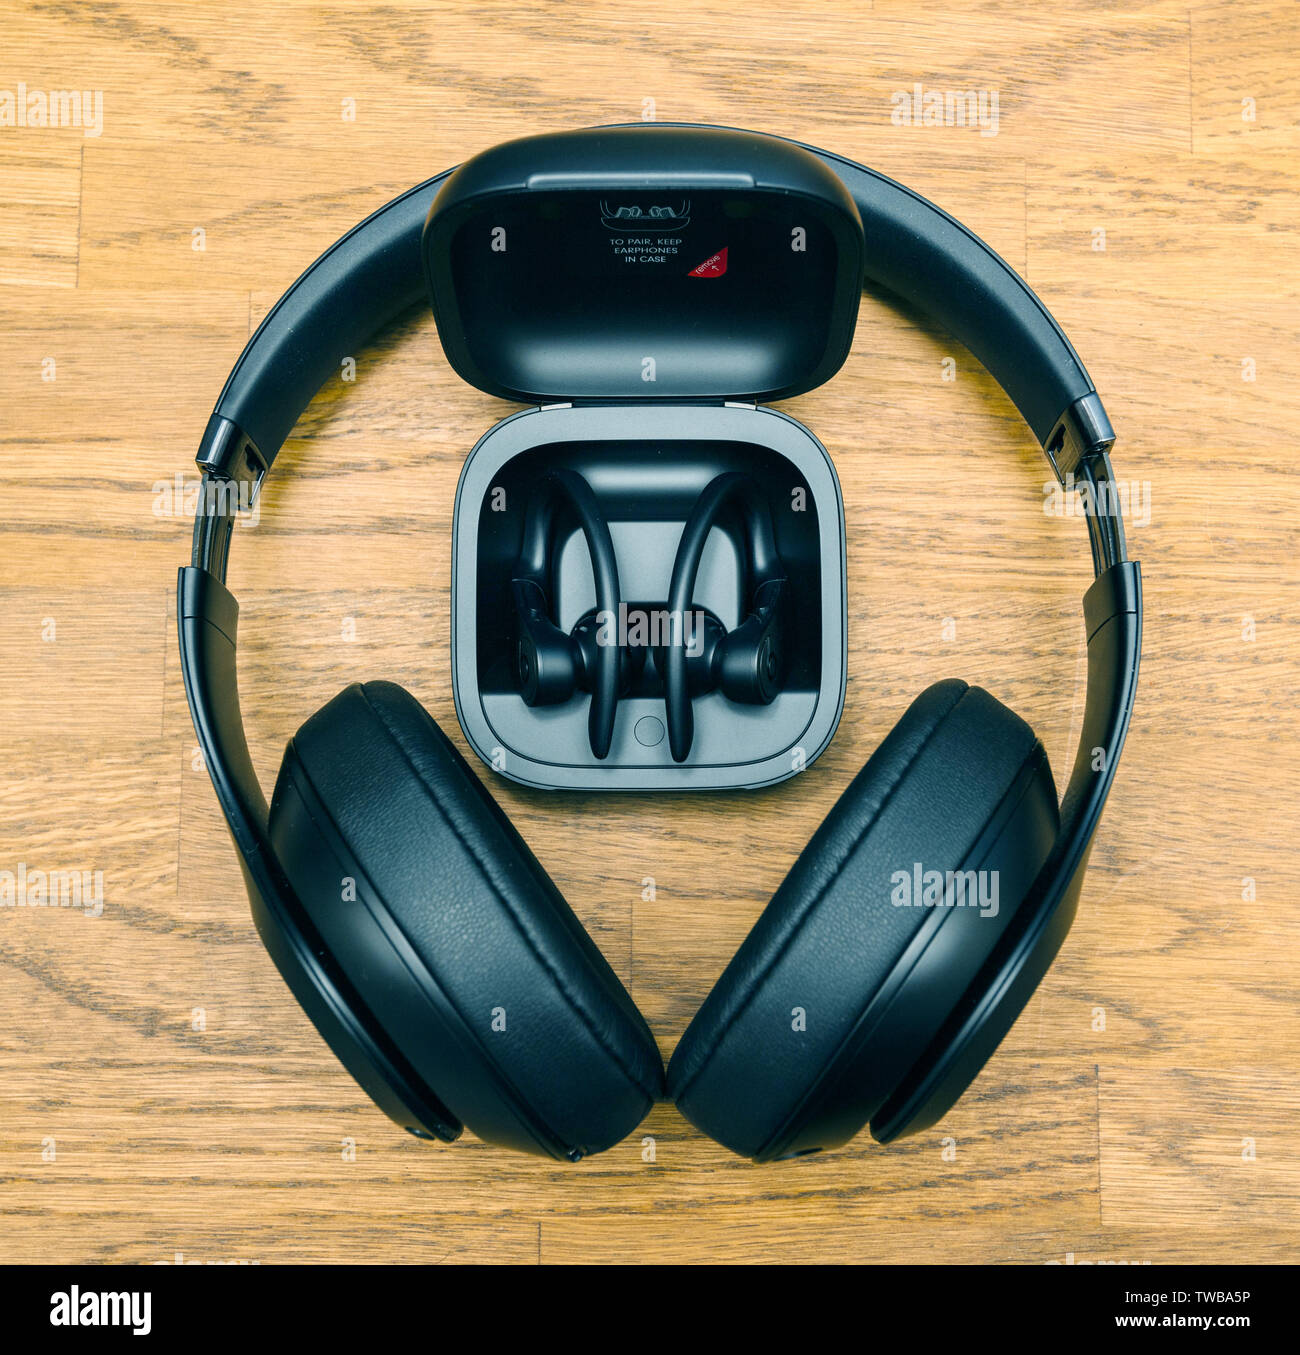 Paris, France - Jun 17, 2019: Square image Beats Studio 3 Wireless and Powerbeats Pro Beats in by Dr Dre in charging case wireless high-performance earphone with integrated Siri - directly above view Stock Photo